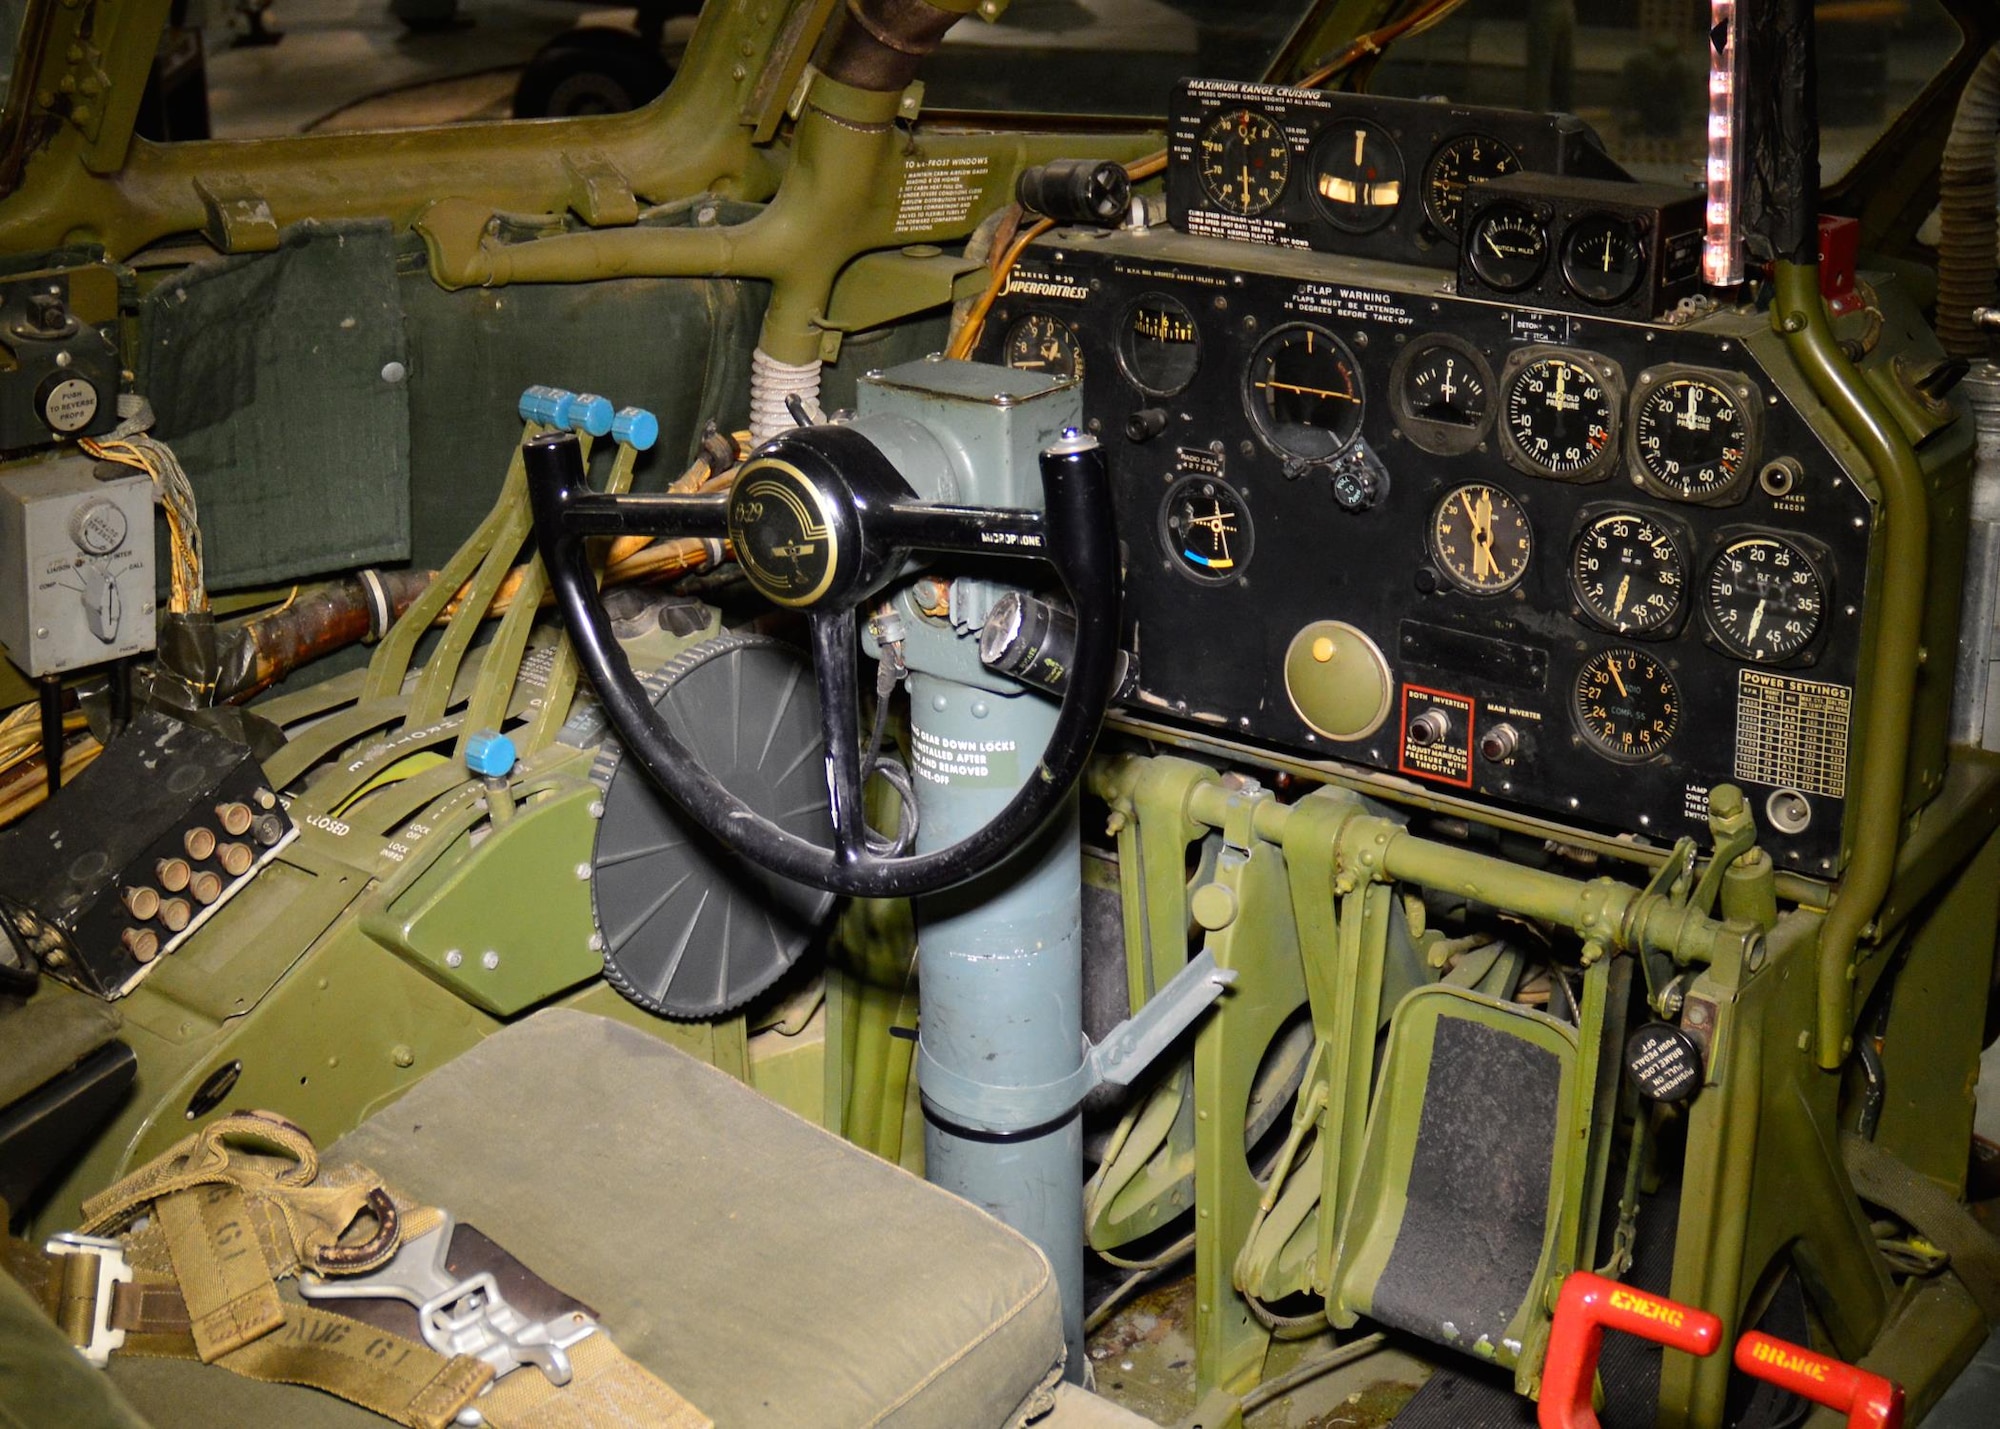 DAYTON, Ohio - Boeing B-29 Superfortress "Bockscar" interior view of the pilot position in the WWII Gallery at the National Museum of the U.S. Air Force. (U.S. Air Force photo)